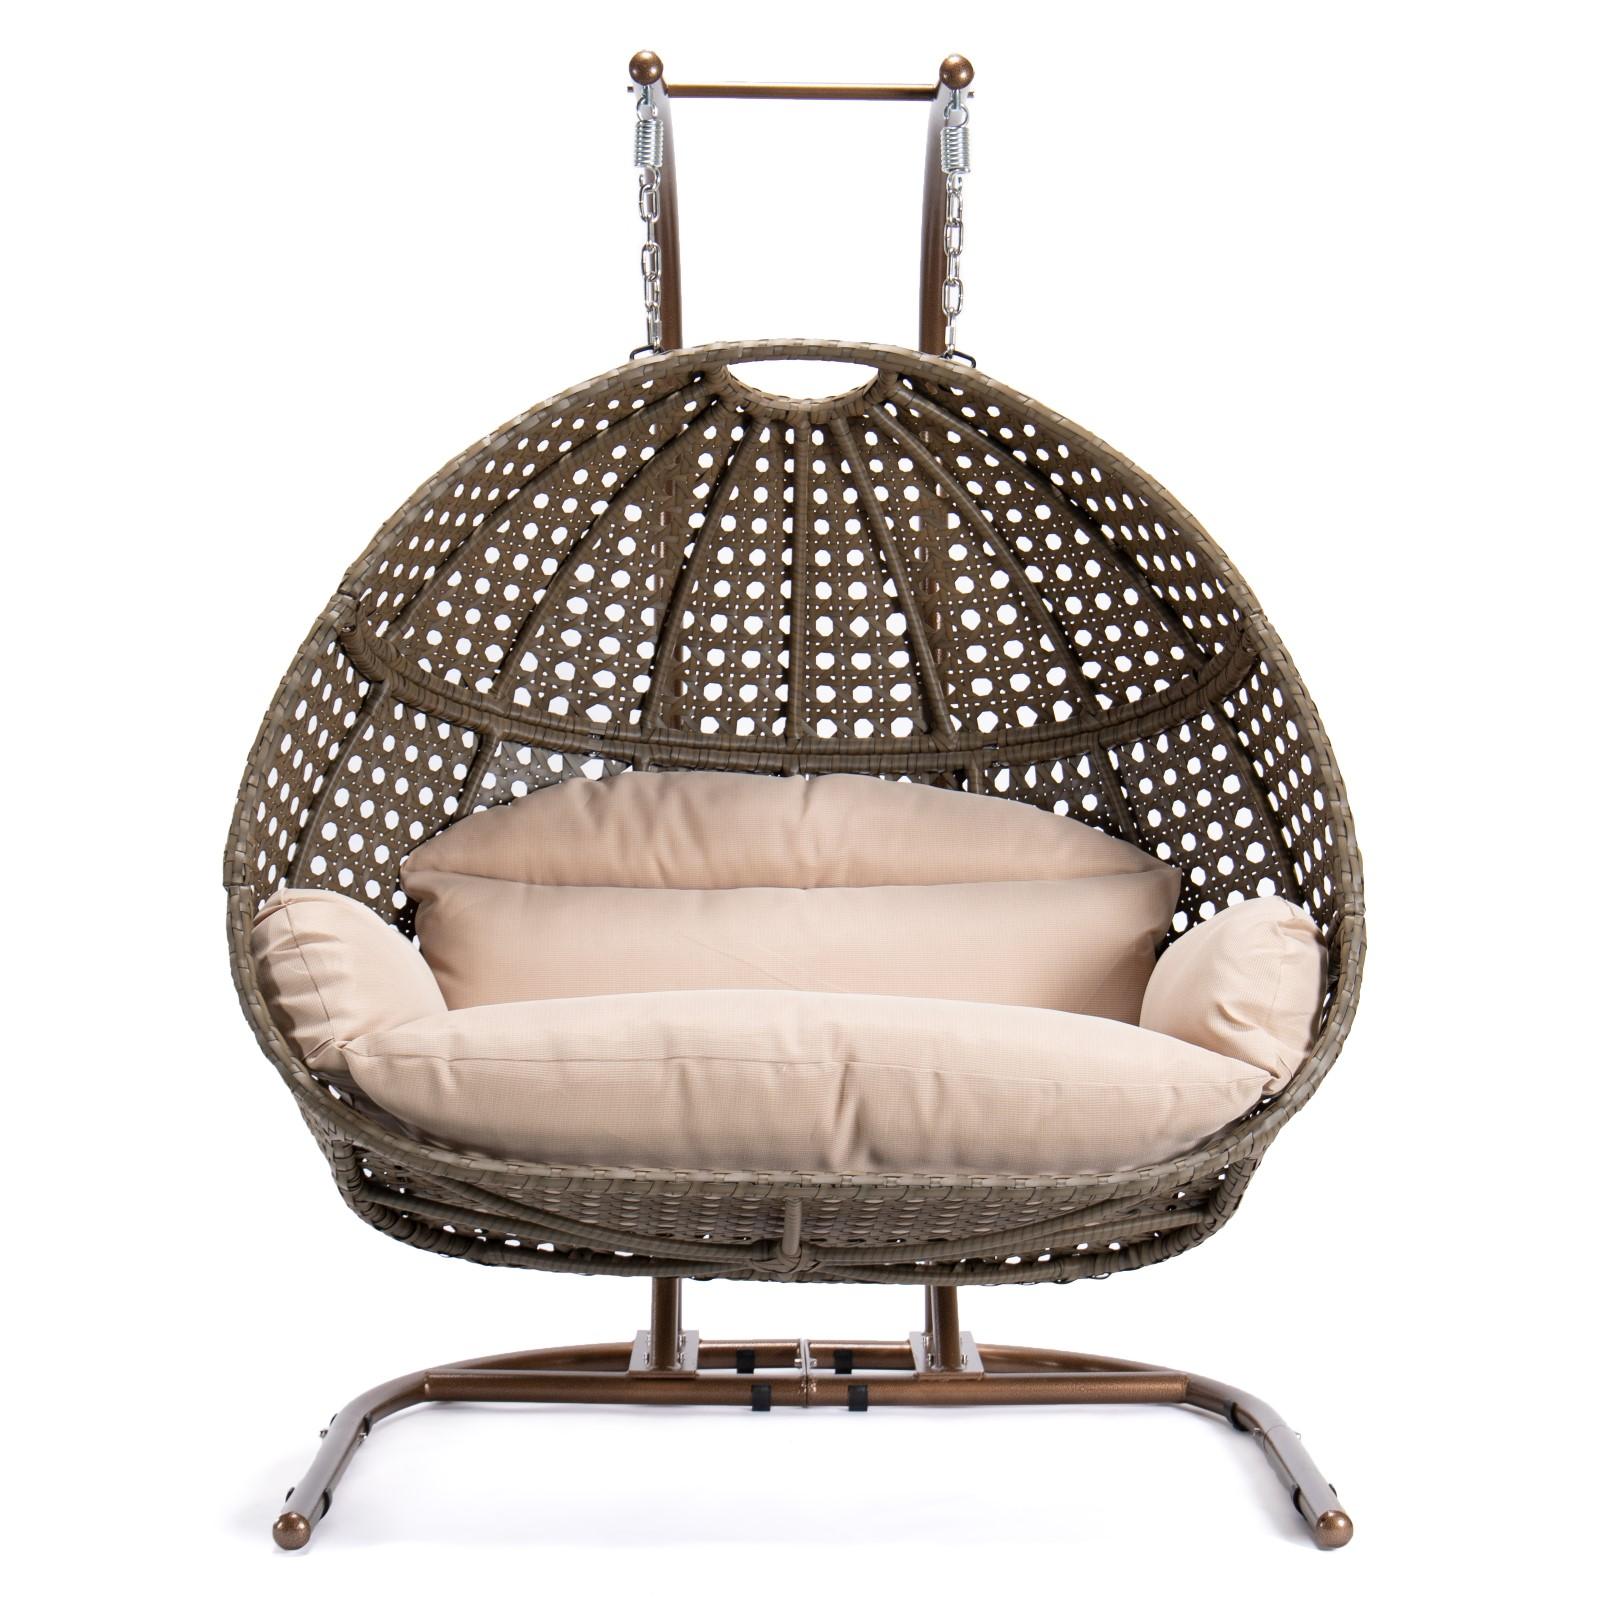 Bayfeve Brown Wicker Hanging Double-Seat Swing Chair with Stand and Beige  Cushion in the Hammocks department at Lowes.com